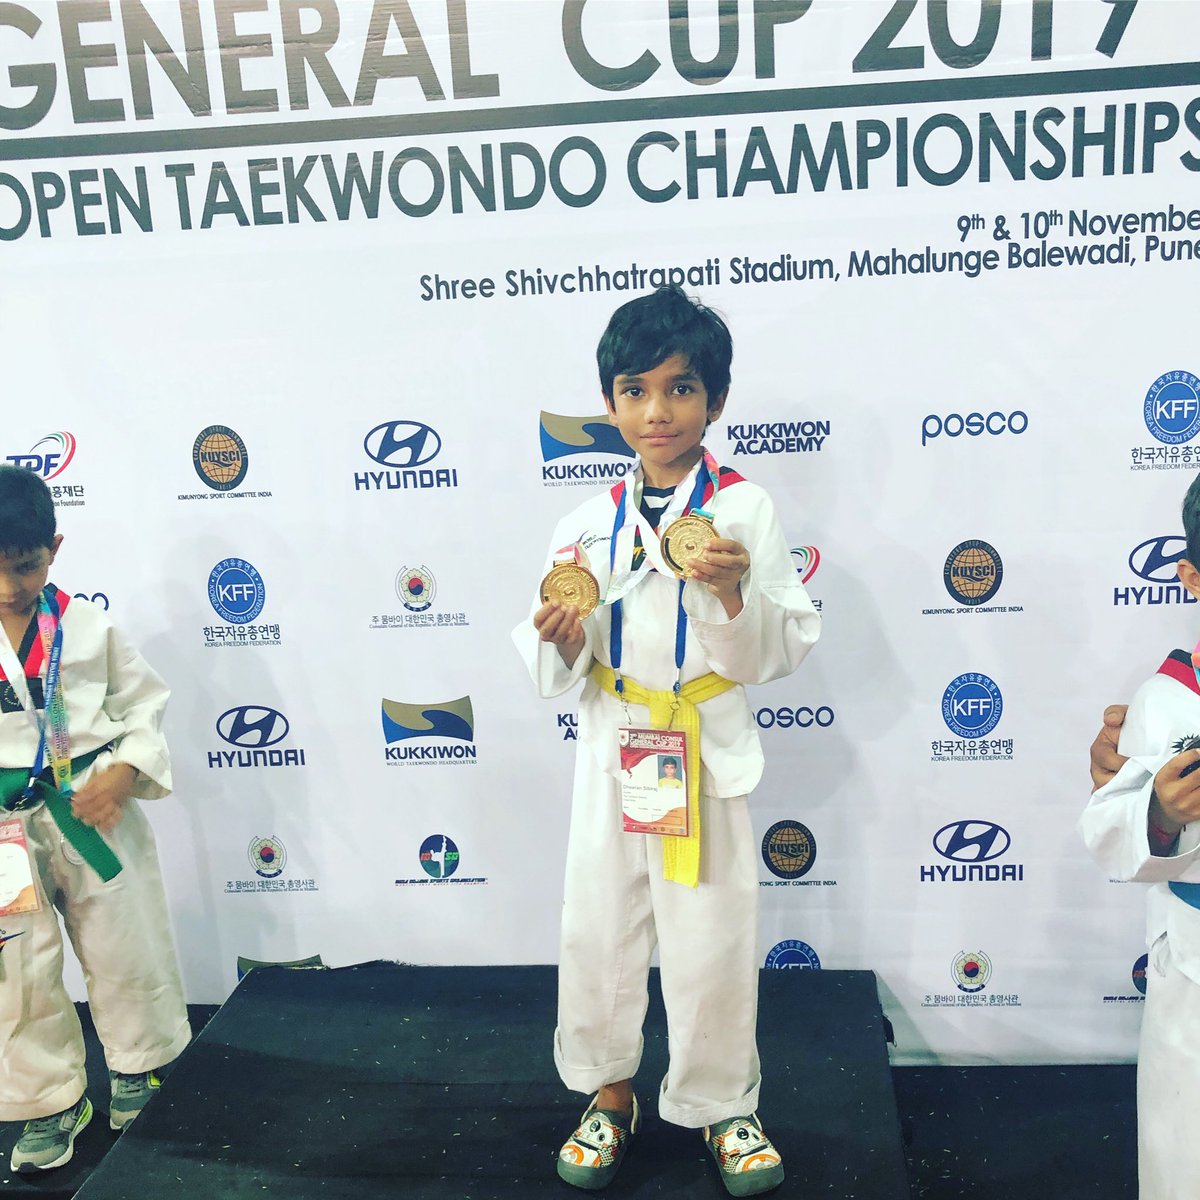 Extremely happy and proud to share that my son #Dheeran has won 2 Gold medals in the National level  Taekwondo championship 2019 that happened today in #pune!😊🙏🏻 #தீரன் #தீரன்சிபிராஜ்  #DheeranSibiraj #Taekwondo #தமிழன்